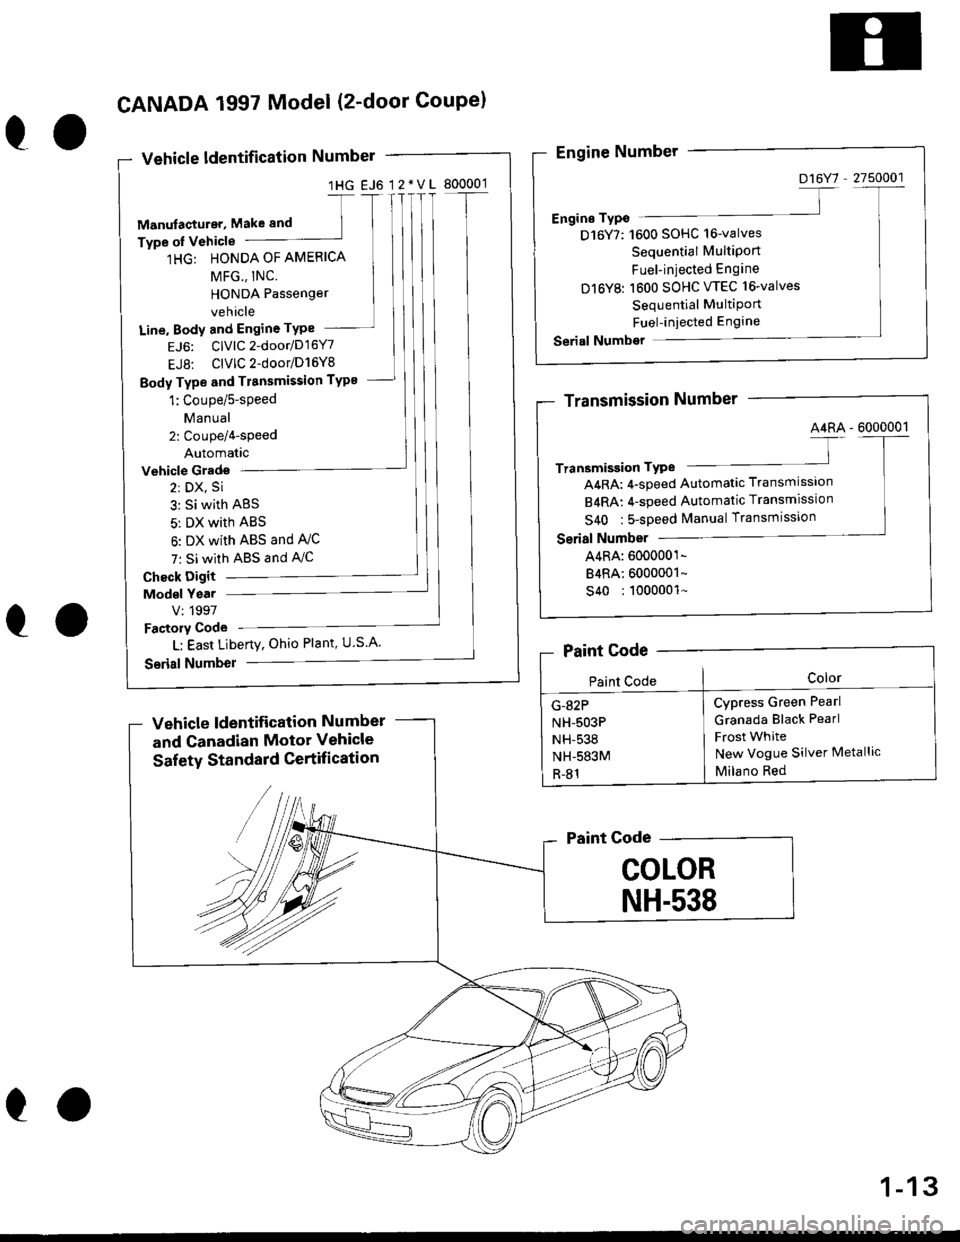 HONDA CIVIC 1999 6.G Workshop Manual 1HG EJ6 12*VL 800001
1HG: HONDA OF AMERICA
Line, Body and Engine TYPe
EJ6: ClvlC2-door/D16Y7
EJ8: ClVlC2-door/D16Y8
Body Type and Tr8nsmission TYP8
Vehicle Grado
2: DX, Si
3: Si with ABS
5: DX with AB